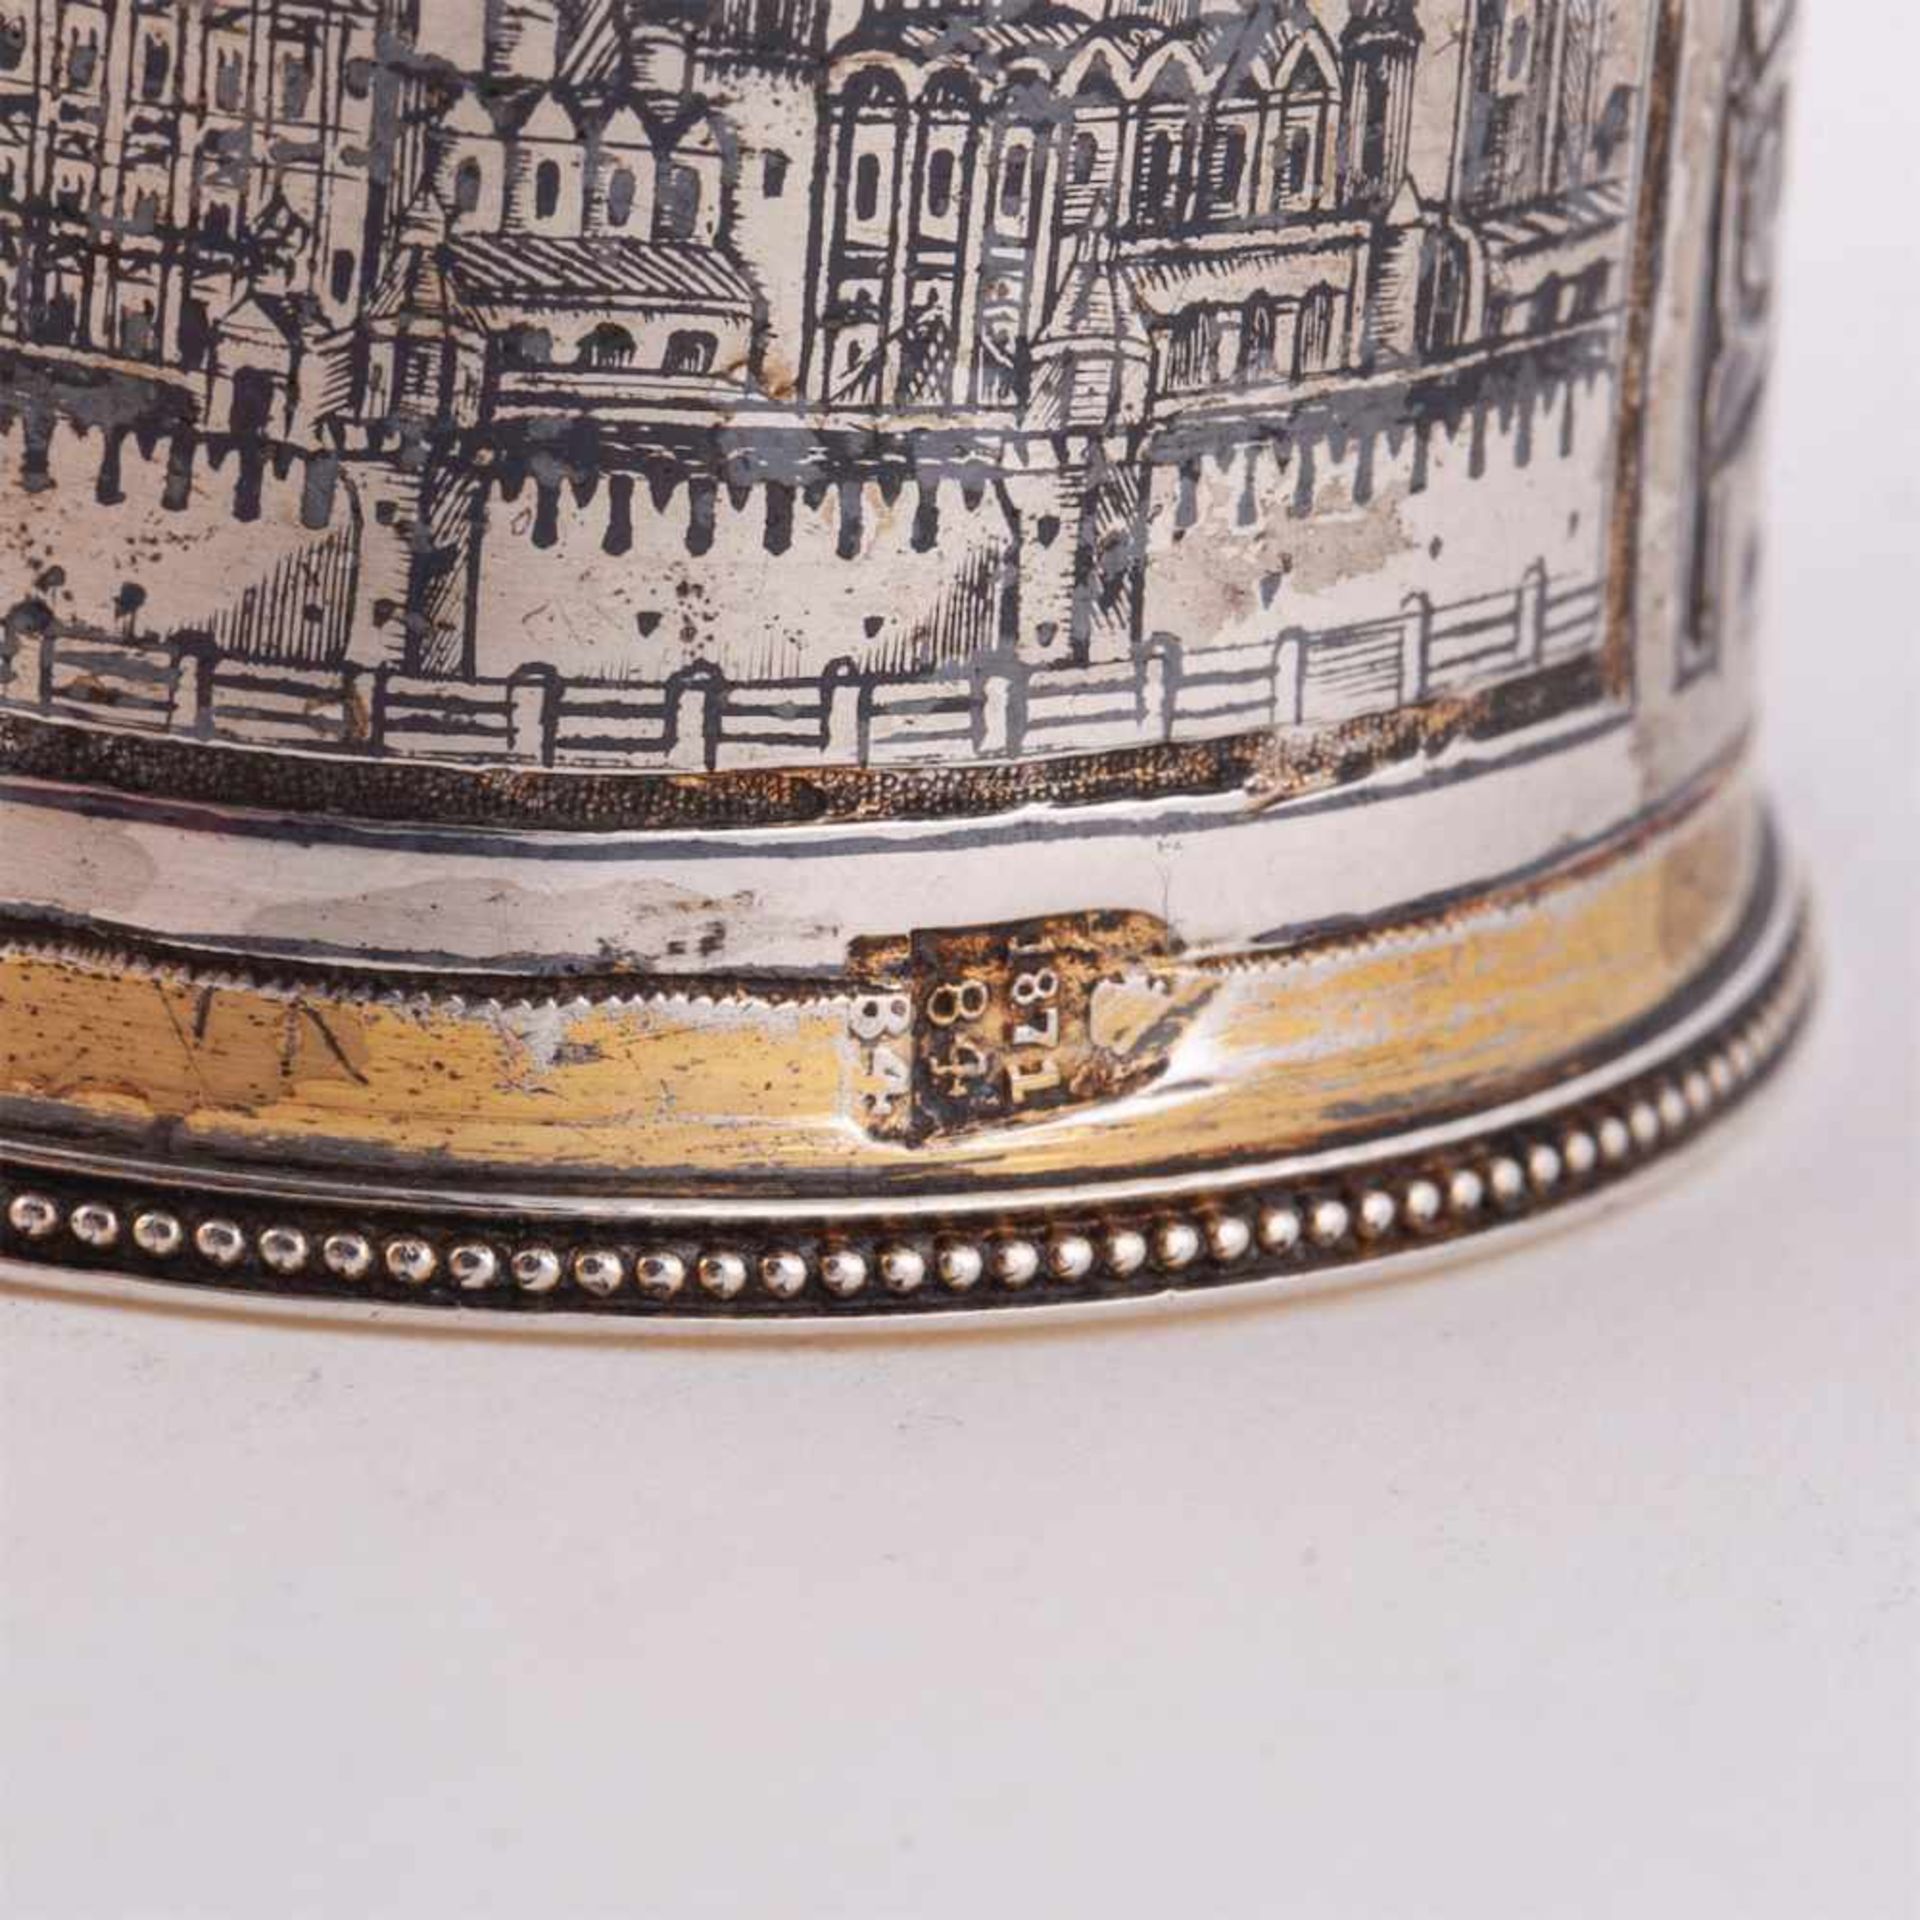 Russian napkin ring with the Moscow Kremlin view - Image 4 of 4